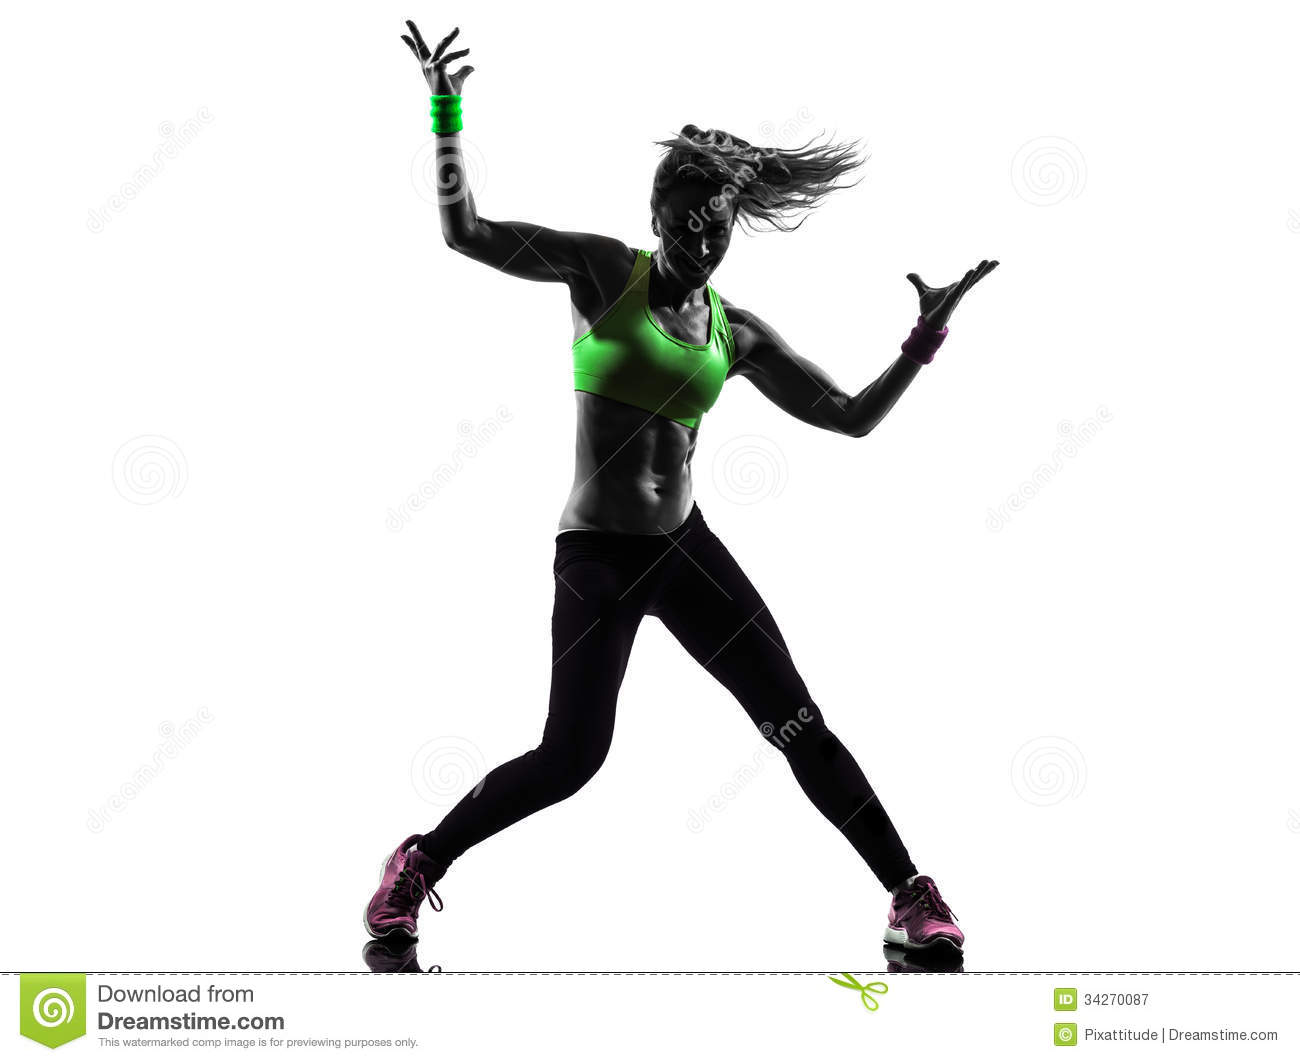 Woman Exercising Fitness Zumba Dancing Silhouette Royalty Free Stock